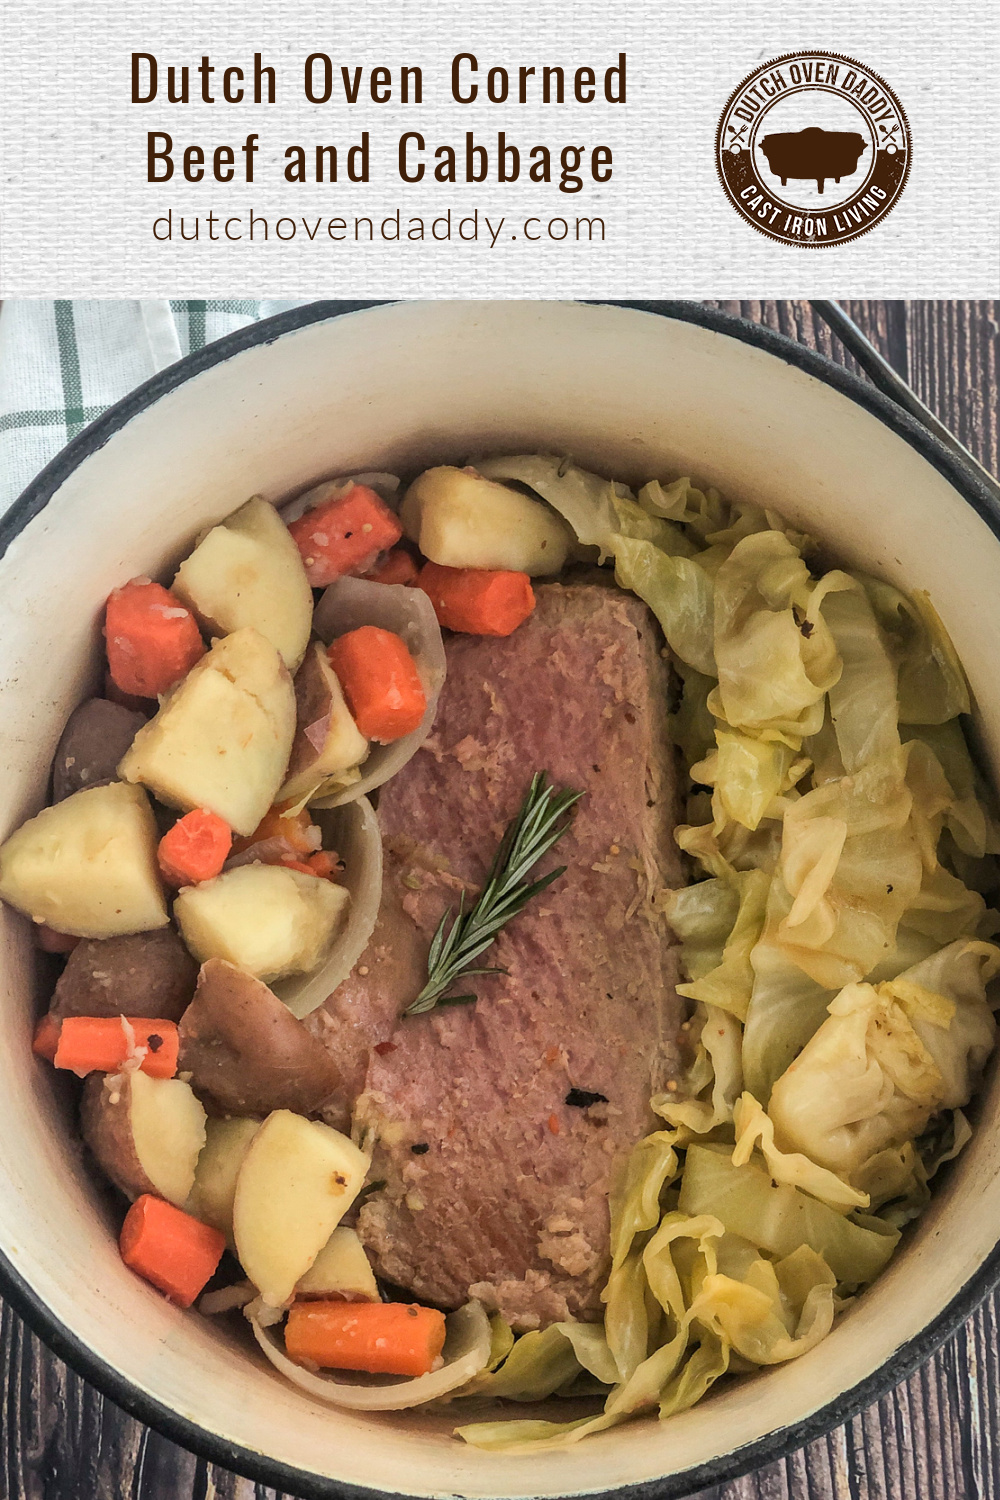 Dutch Oven Corned Beef and Cabbage - Dutch Oven Daddy